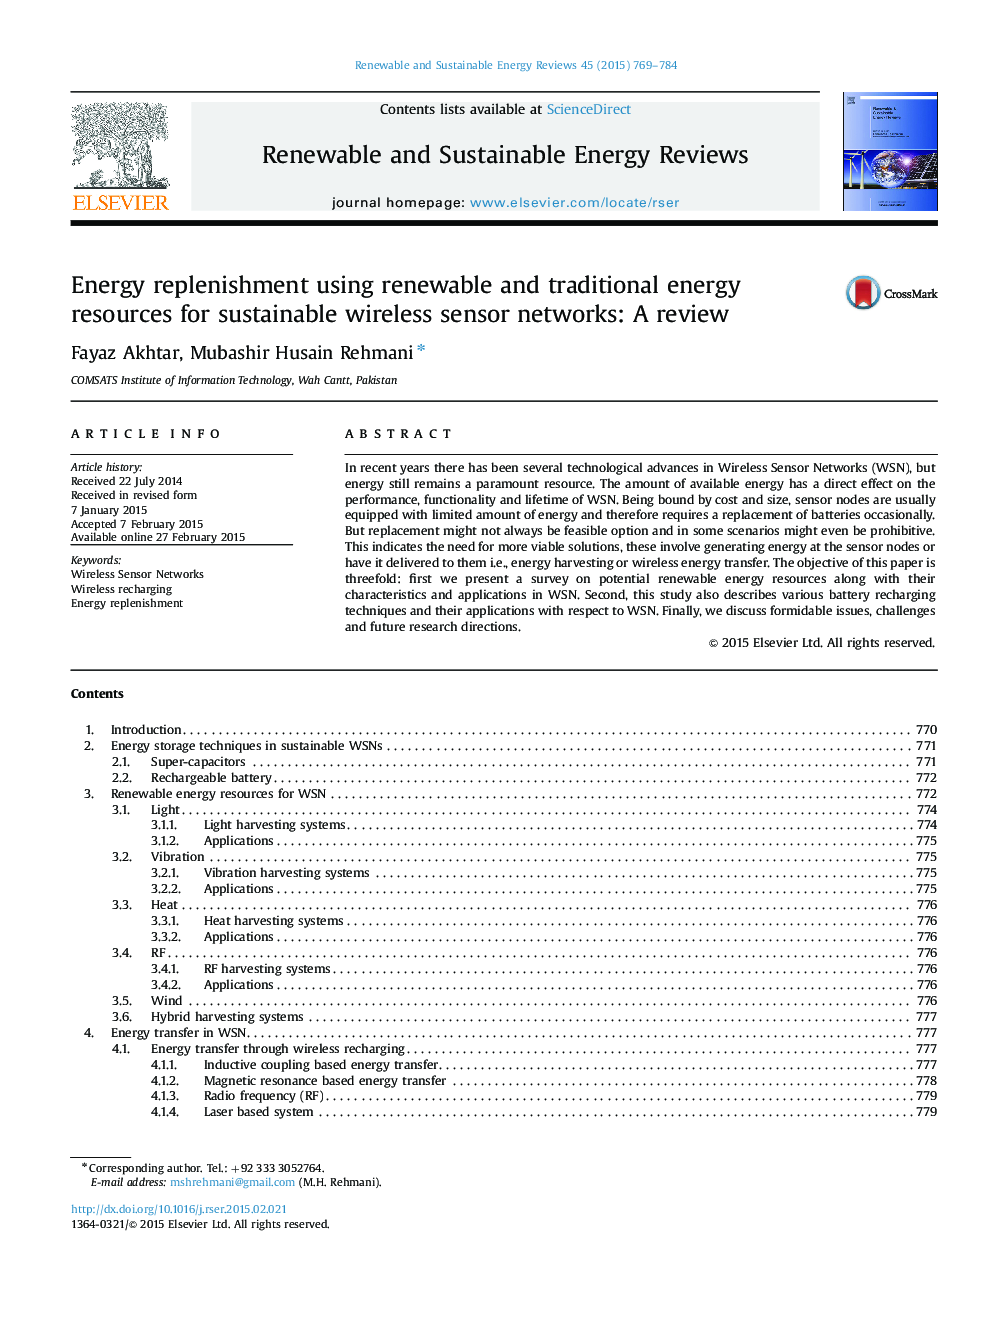 Energy replenishment using renewable and traditional energy resources for sustainable wireless sensor networks: A review